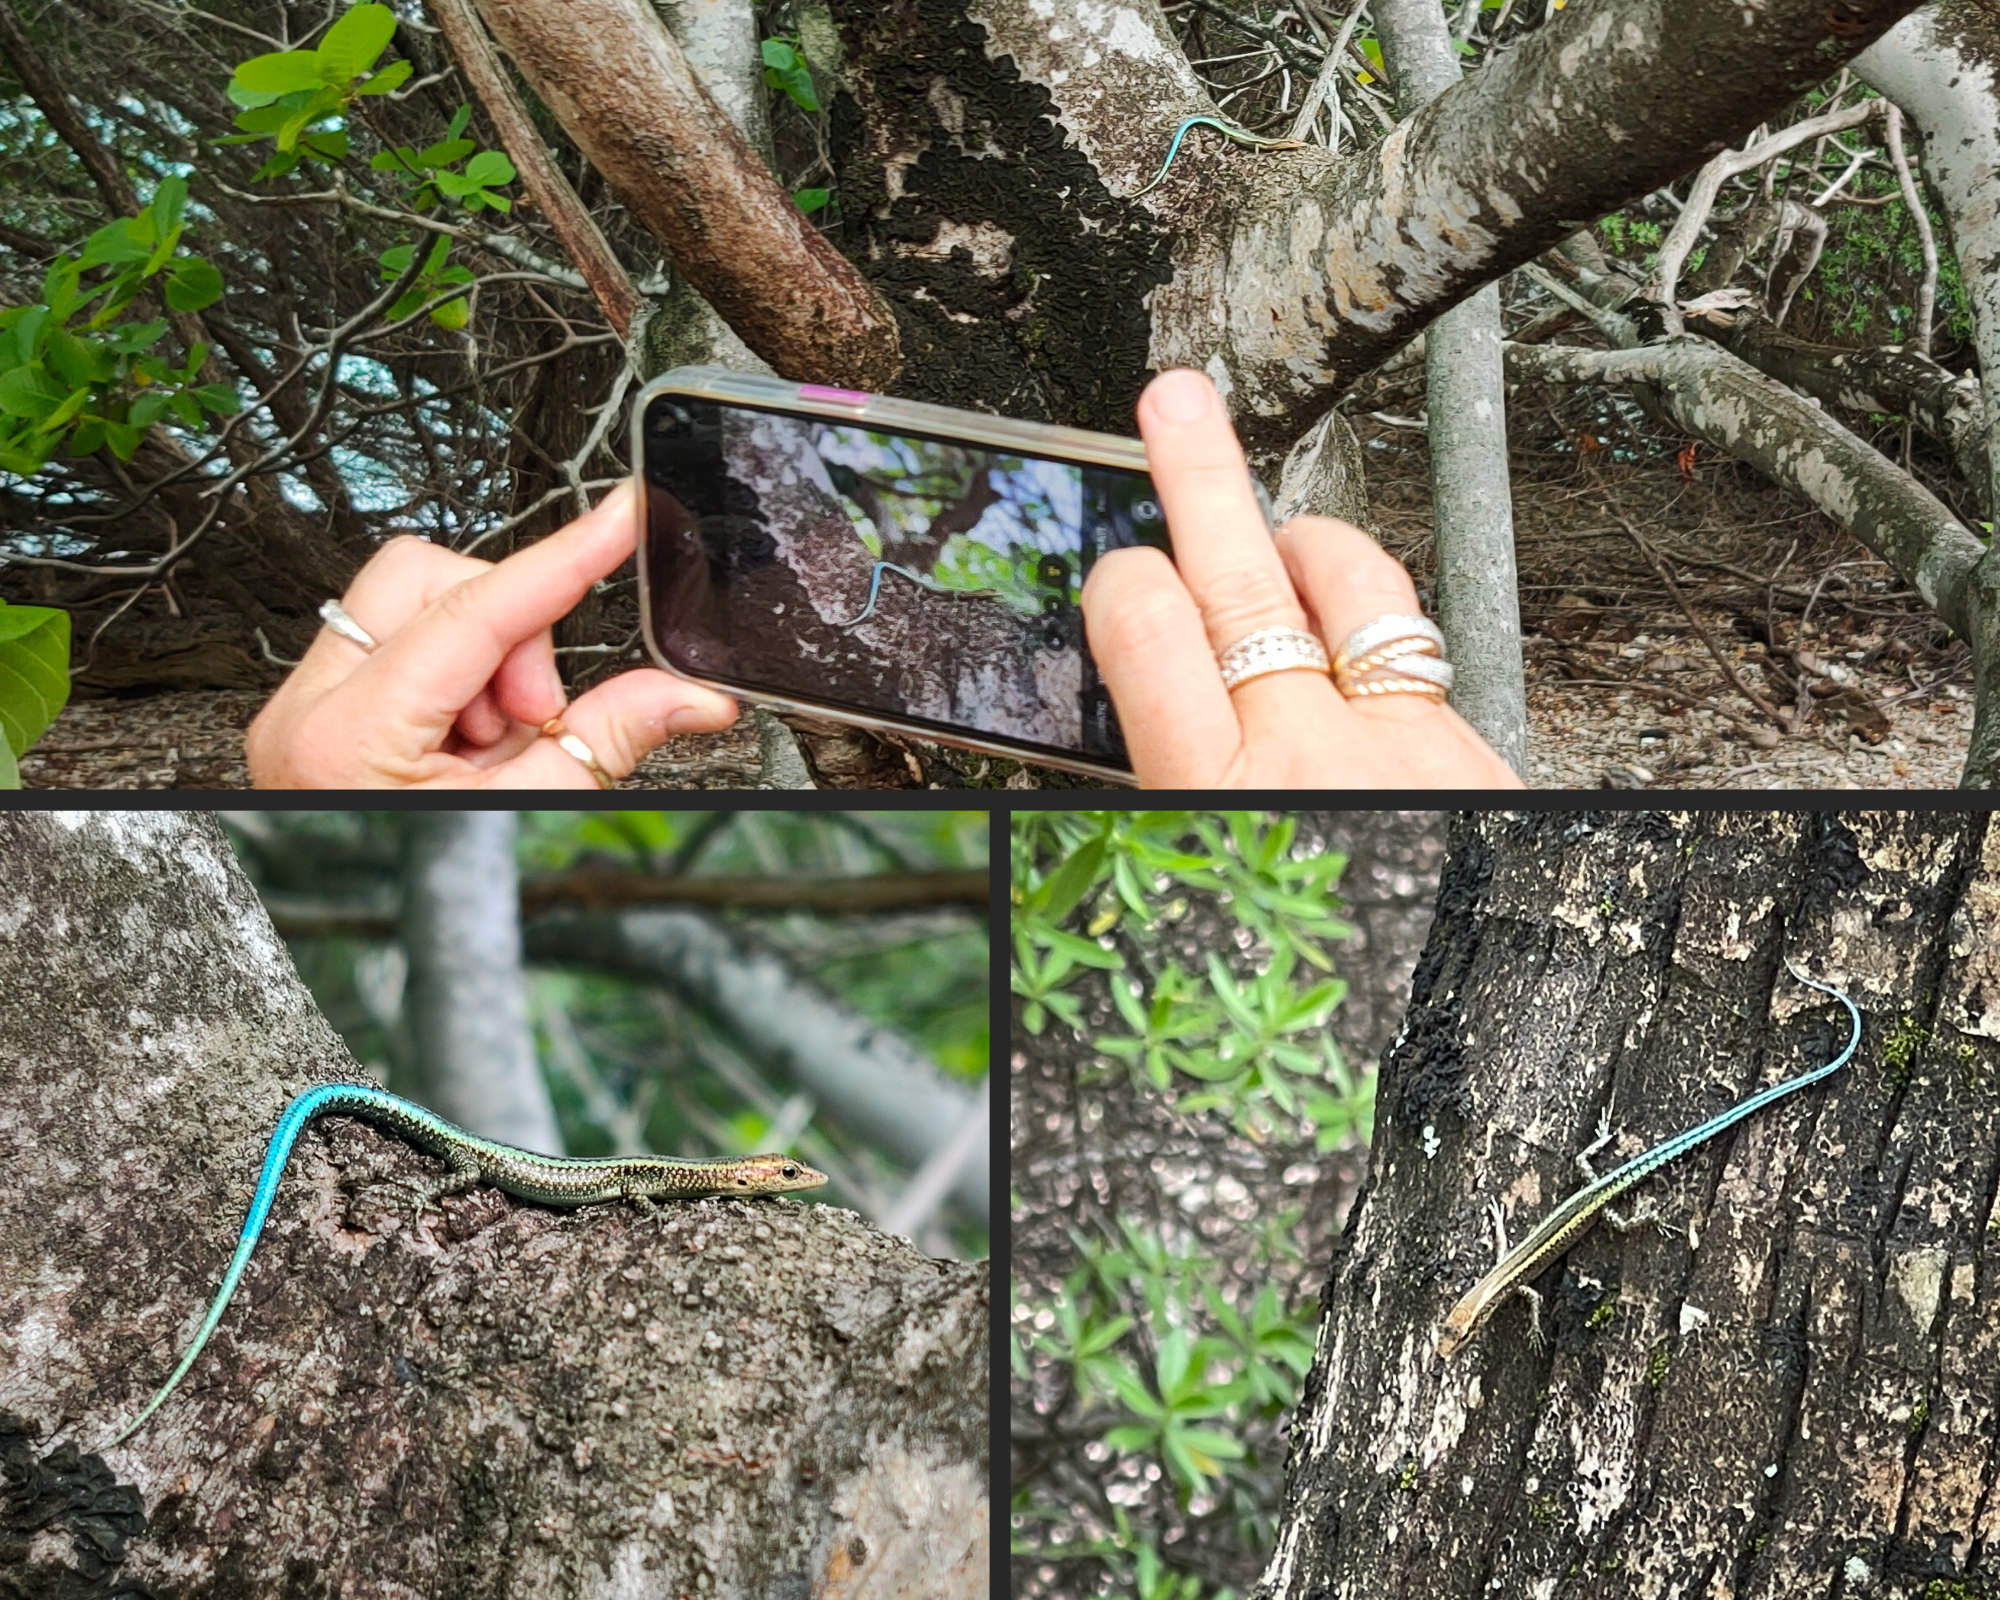 A photocollage with blue tailed skinks pjhotographed on trees in Pulu Blan in Cocos Islands